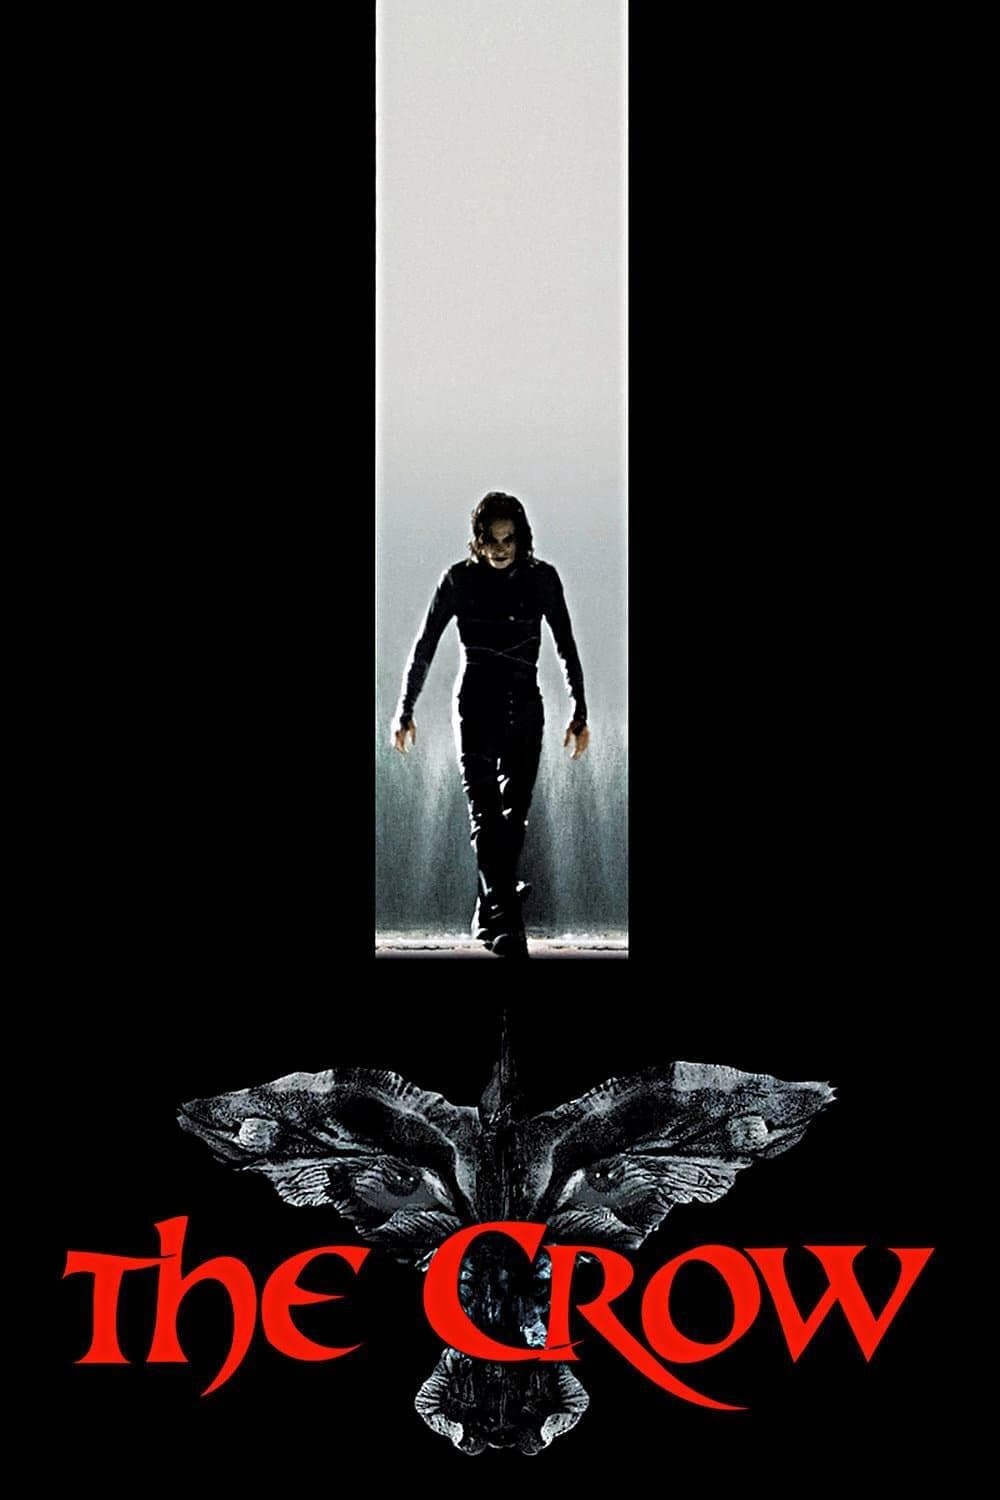 The Crow Movie poster